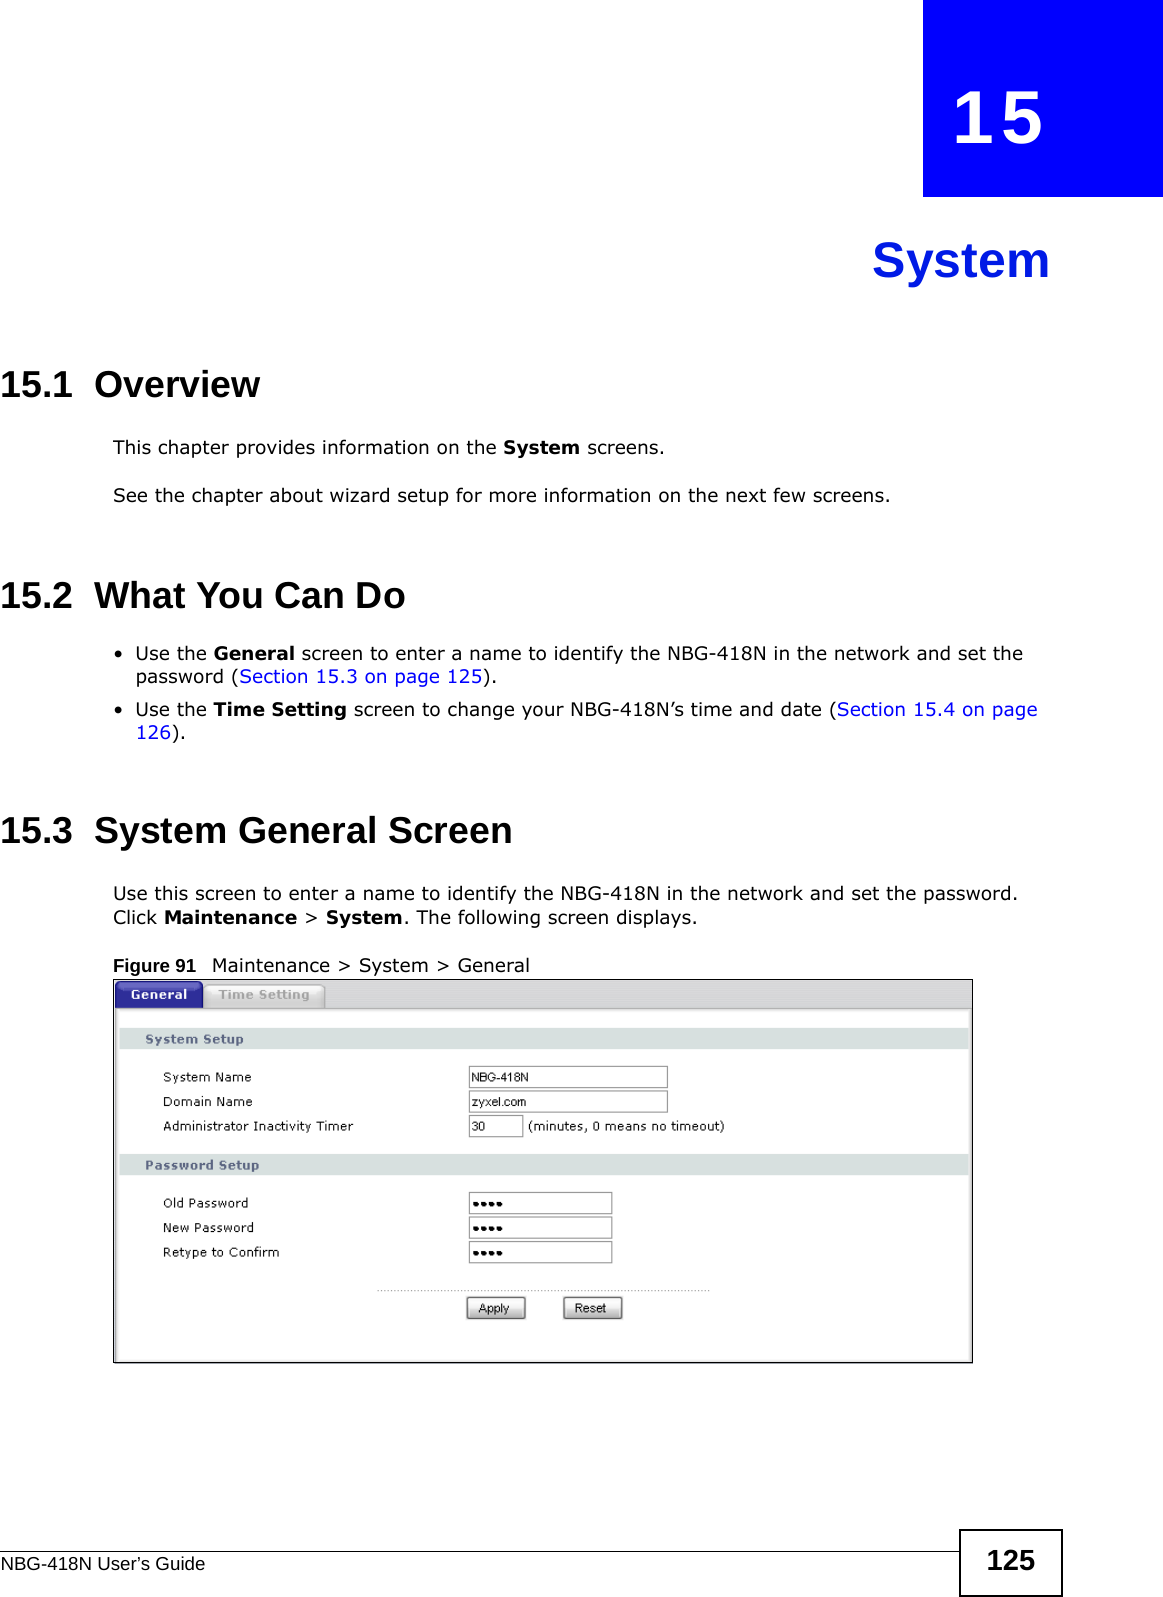 NBG-418N User’s Guide 125CHAPTER   15System15.1  OverviewThis chapter provides information on the System screens. See the chapter about wizard setup for more information on the next few screens.15.2  What You Can Do•Use the General screen to enter a name to identify the NBG-418N in the network and set the password (Section 15.3 on page 125).•Use the Time Setting screen to change your NBG-418N’s time and date (Section 15.4 on page 126).15.3  System General Screen Use this screen to enter a name to identify the NBG-418N in the network and set the password. Click Maintenance &gt; System. The following screen displays.Figure 91   Maintenance &gt; System &gt; General 